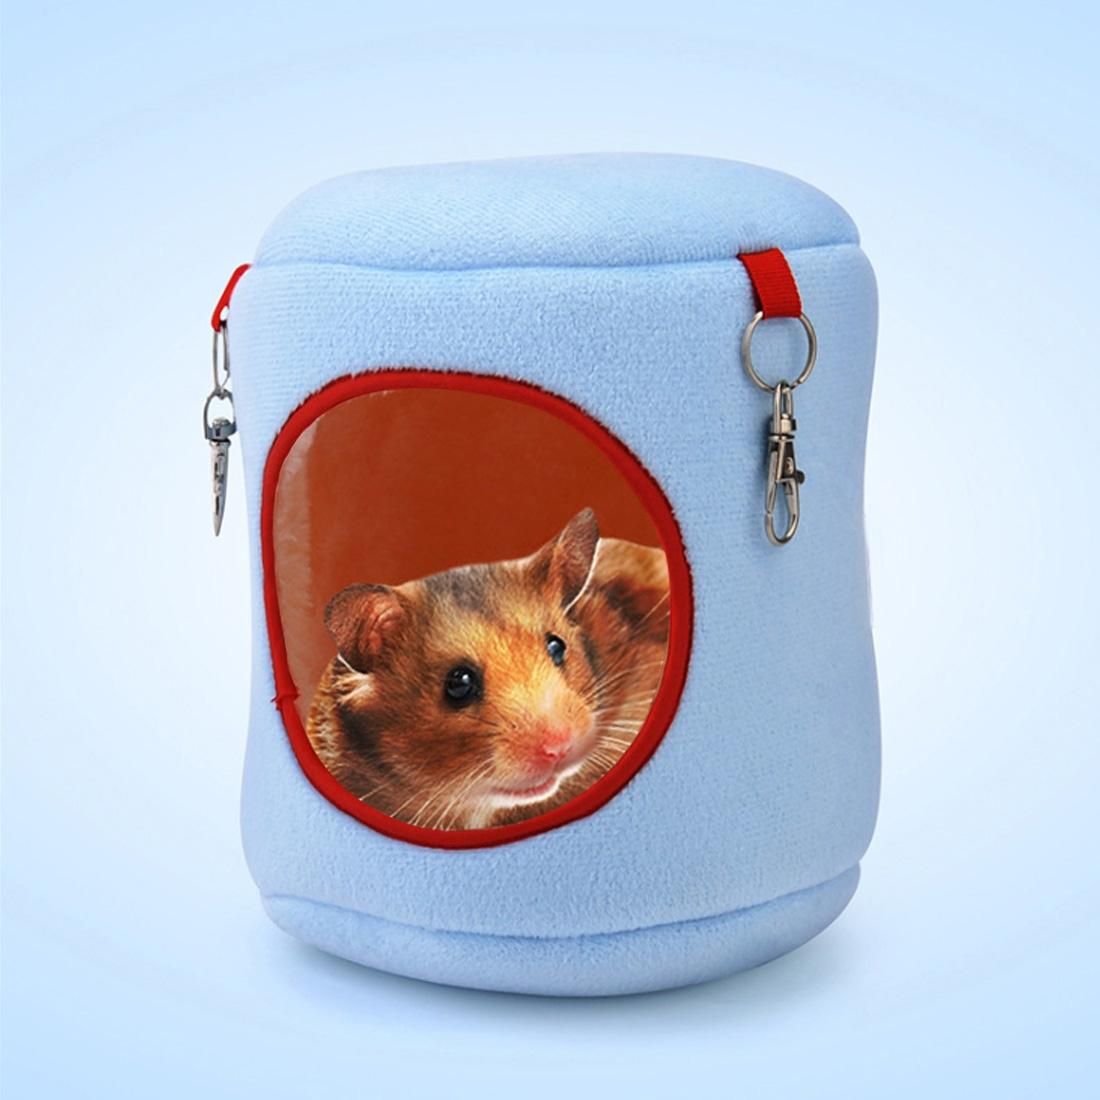 Flannel Cylinder Pet House Warm Hamster Hammock Hanging Bed Small Pets Nest, S, Size:10*9*9cm (Blue)